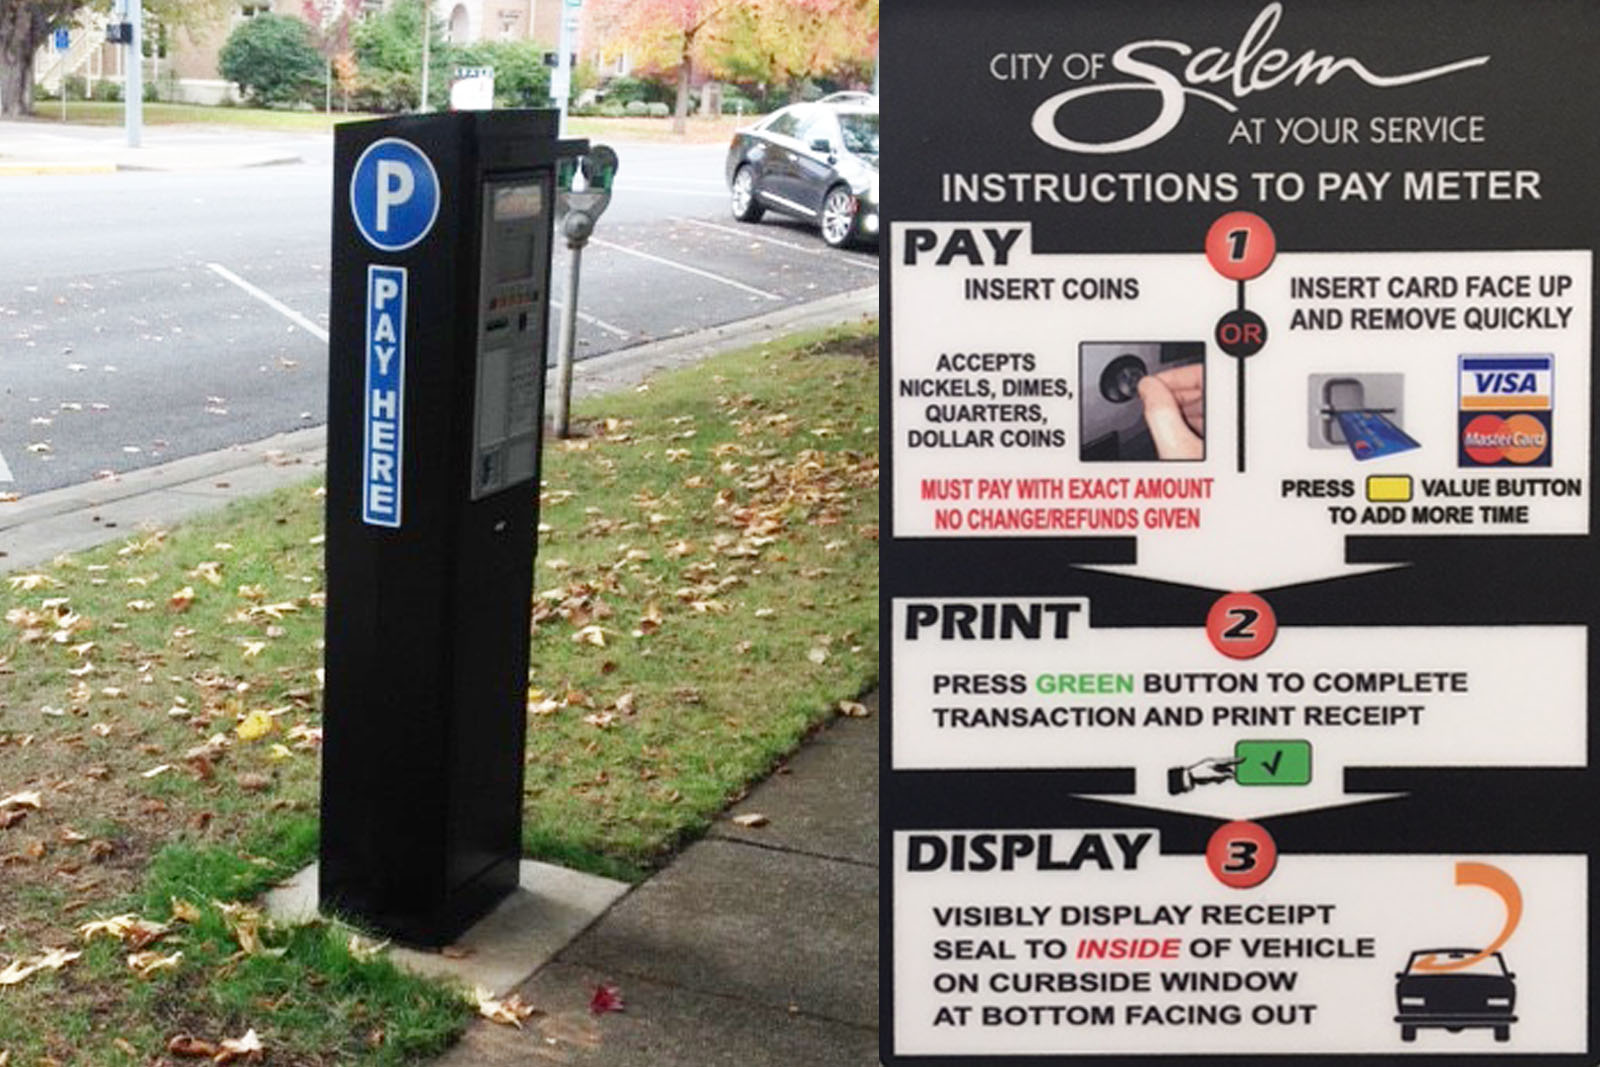 Electronic pay station and instruction diagram: Pay, print, display